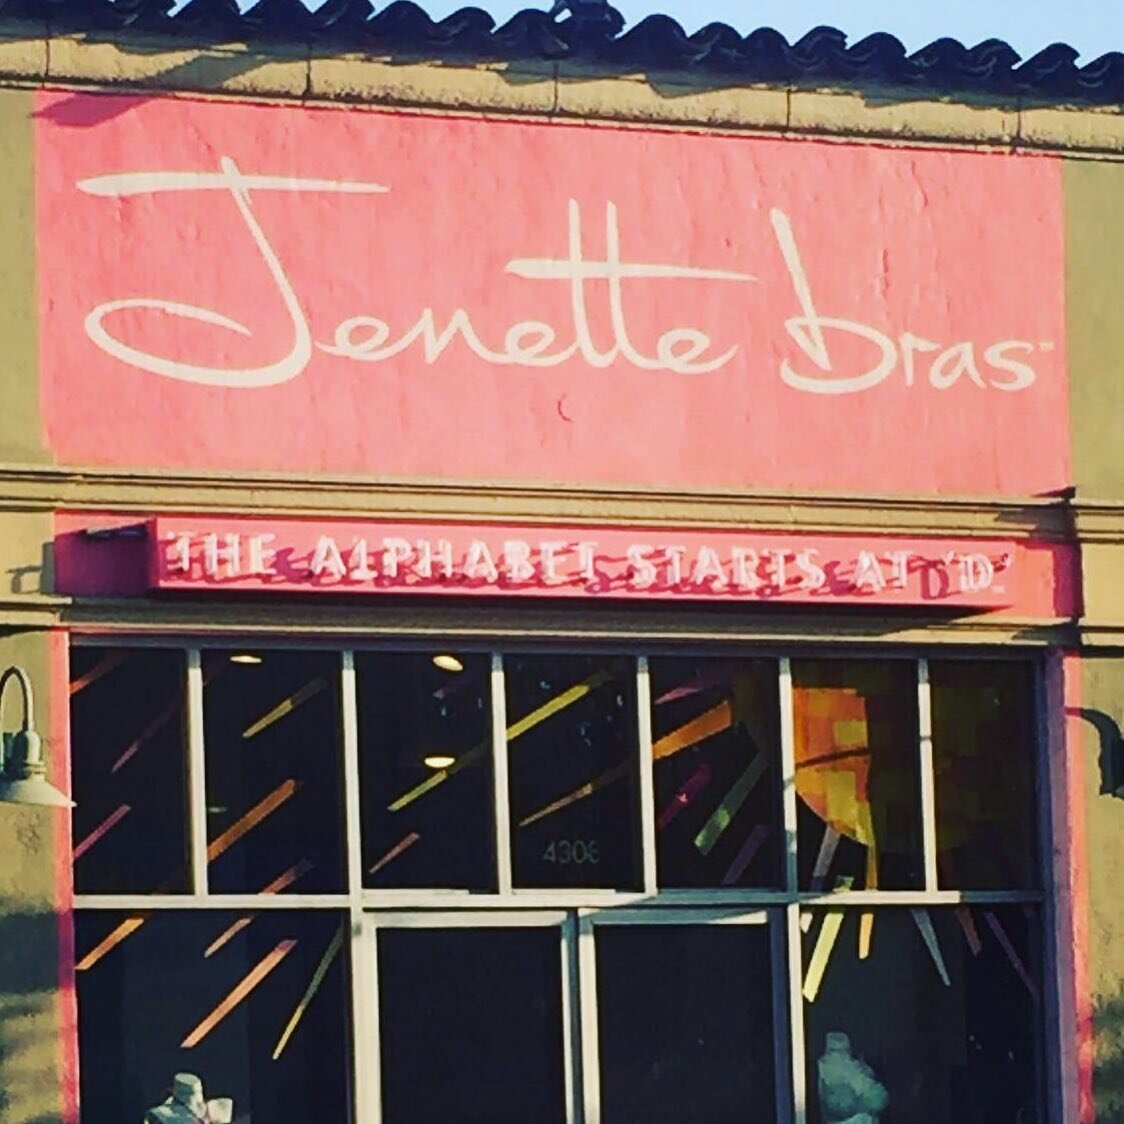 We love @jenettebras_la! Please check them out and buy some bras!!